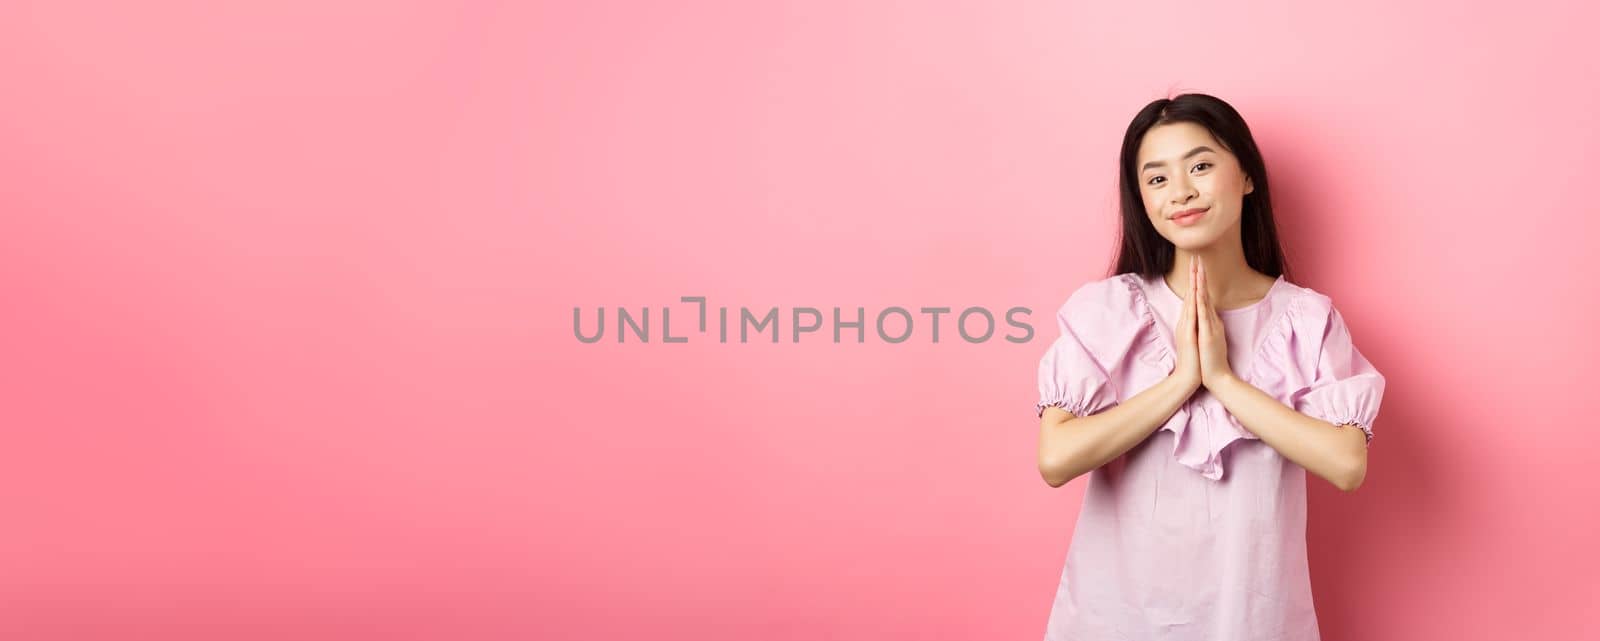 Cute asian girl say thank you, smiling and looking happy, showing namaste gesture in gratitude, standing in dress against pink background.